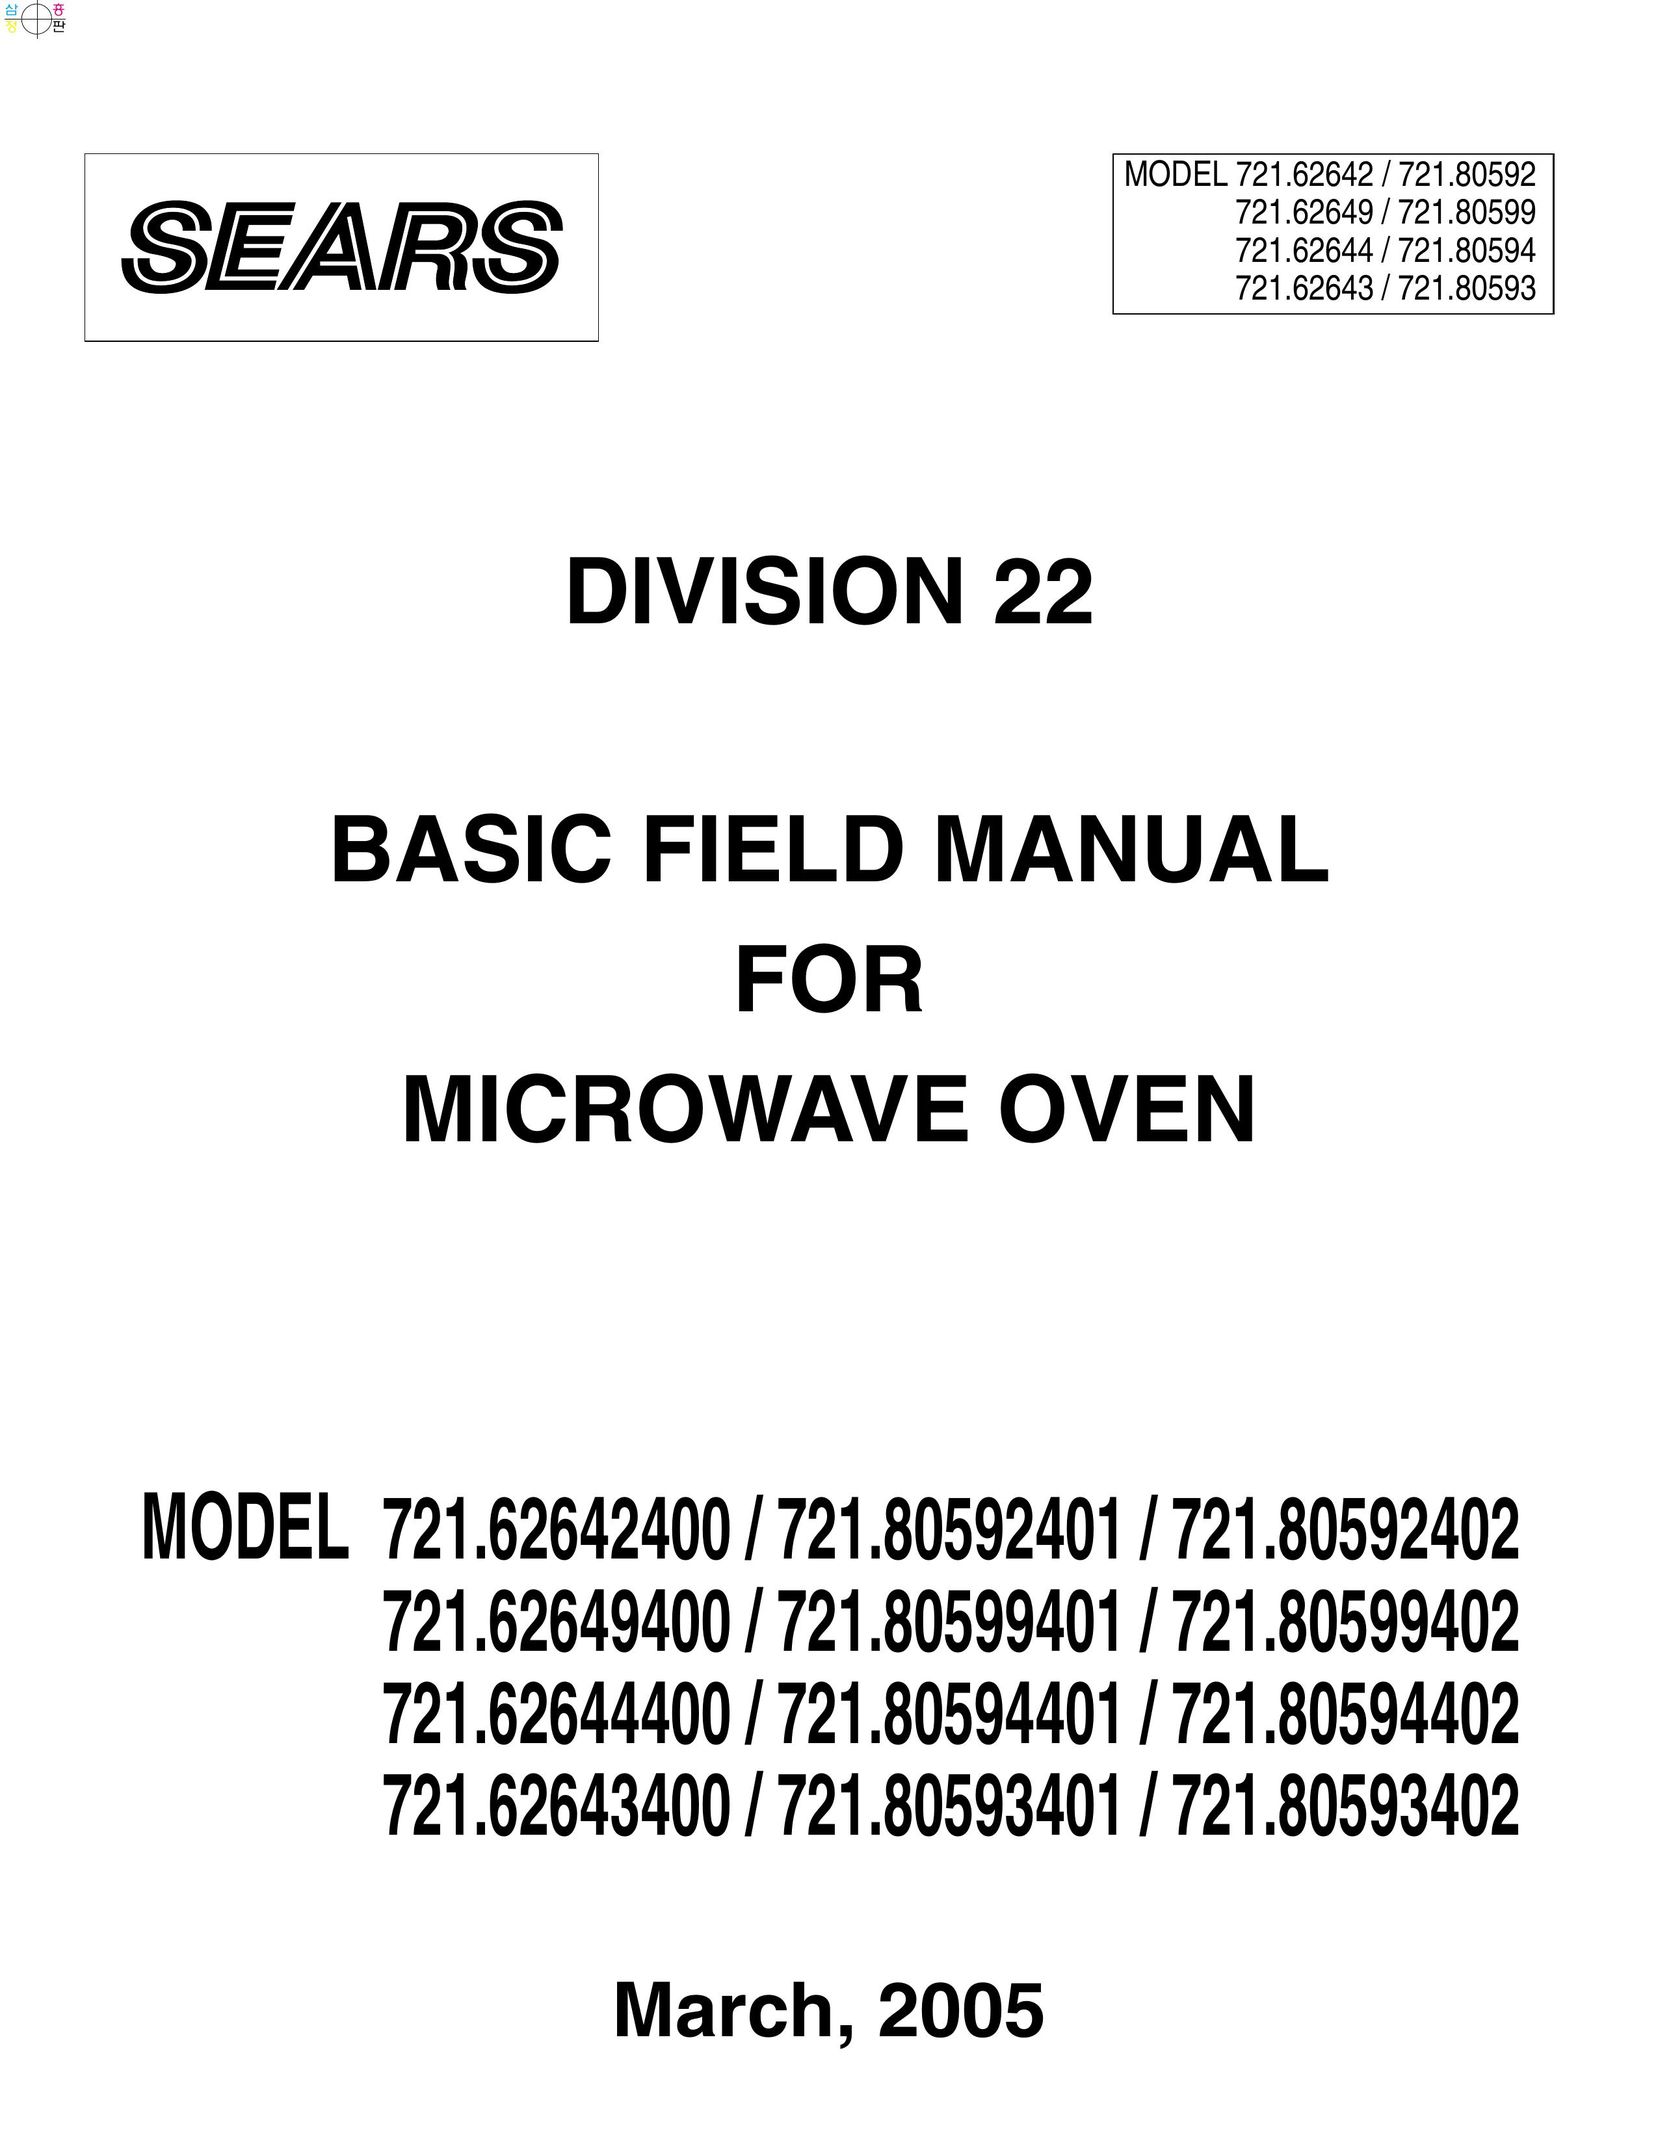 Kenmore 721.626434 Microwave Oven User Manual